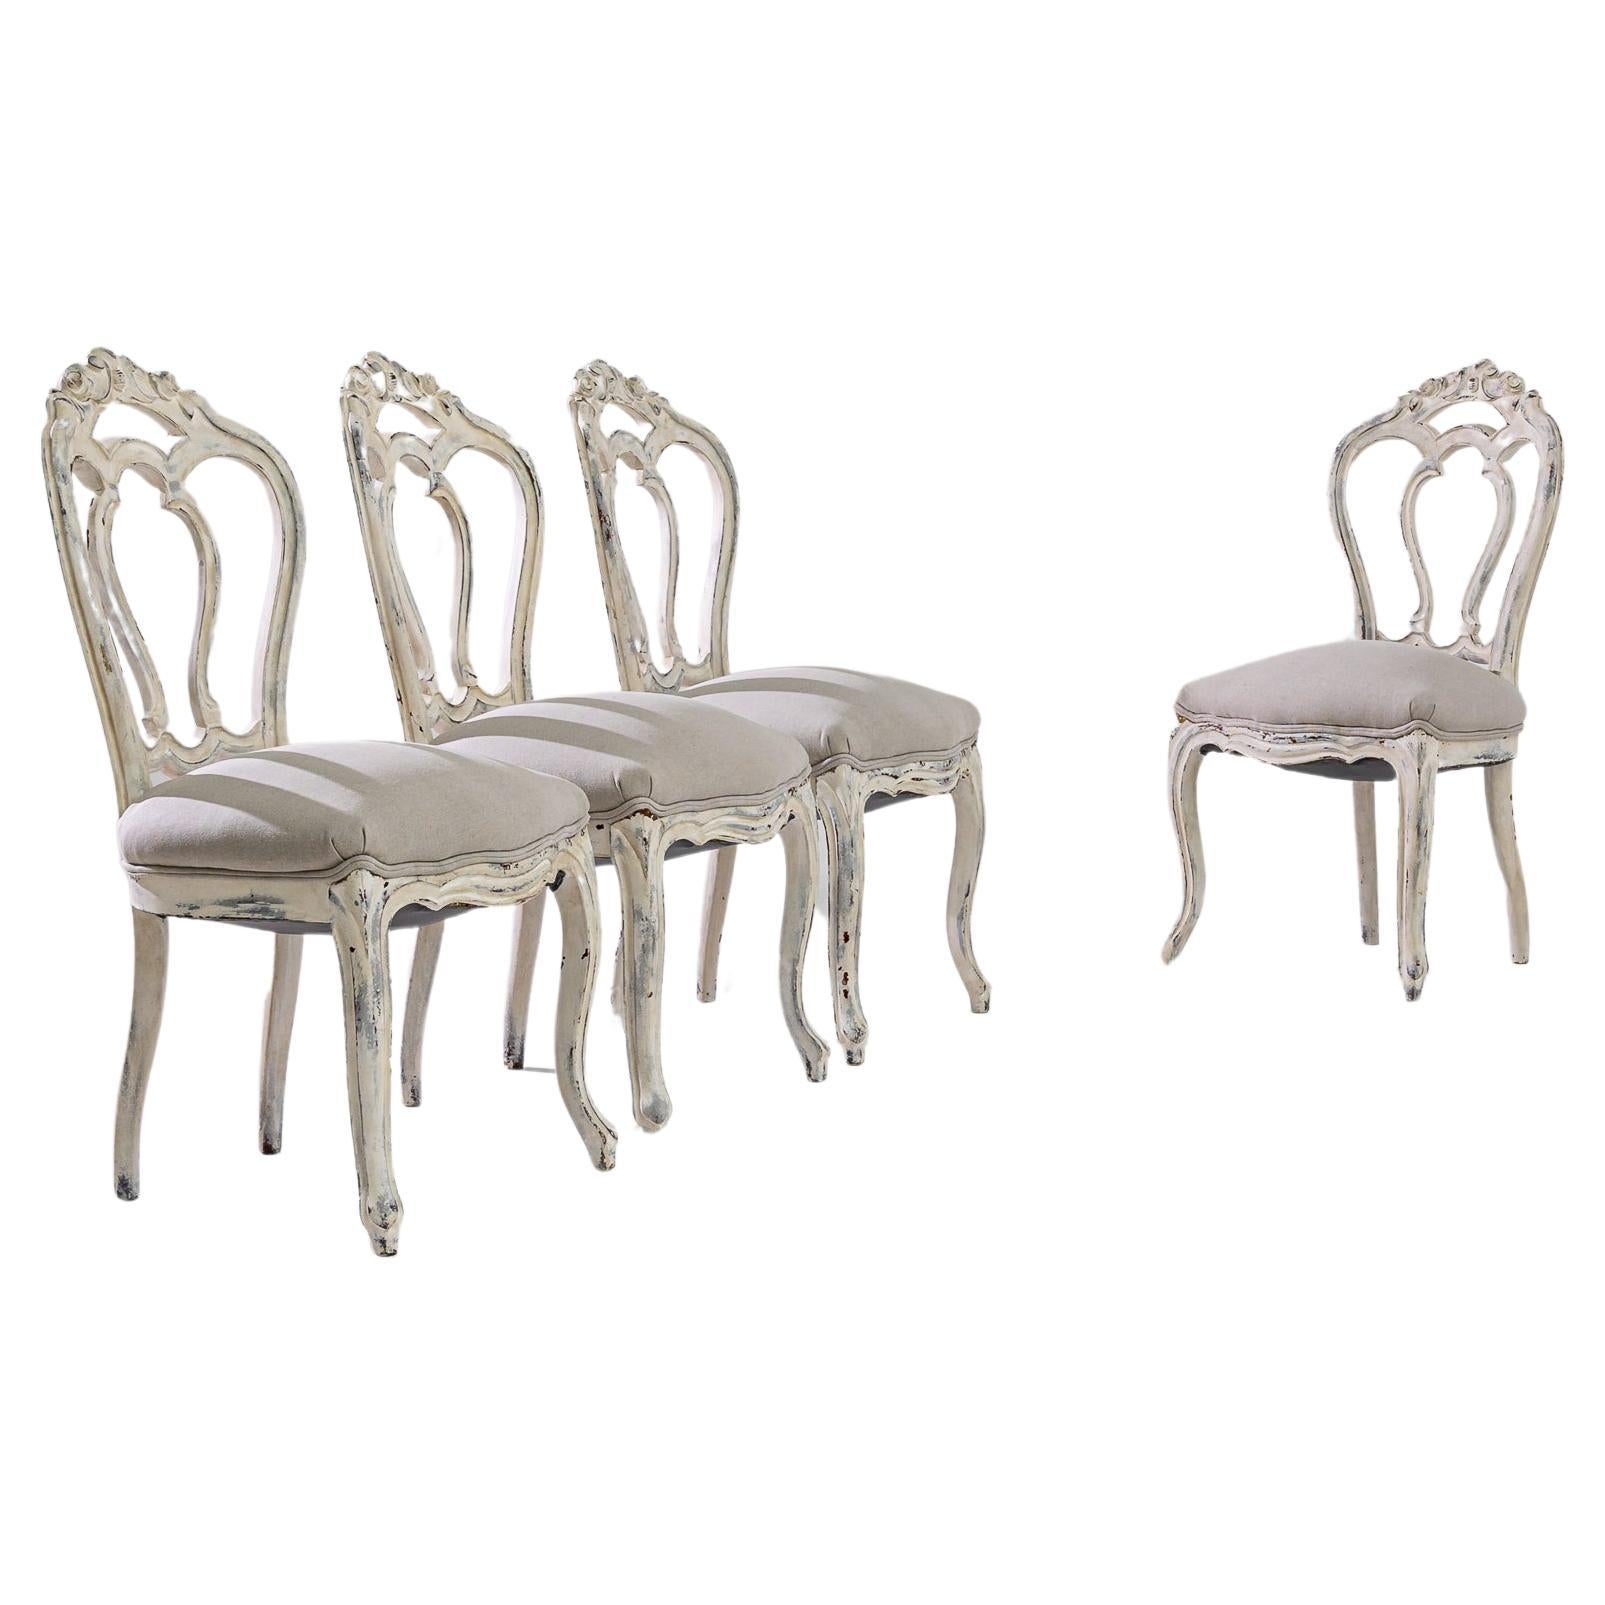 1900s Wooden Dining Chairs with Upholstered Seats, Set of 4 For Sale